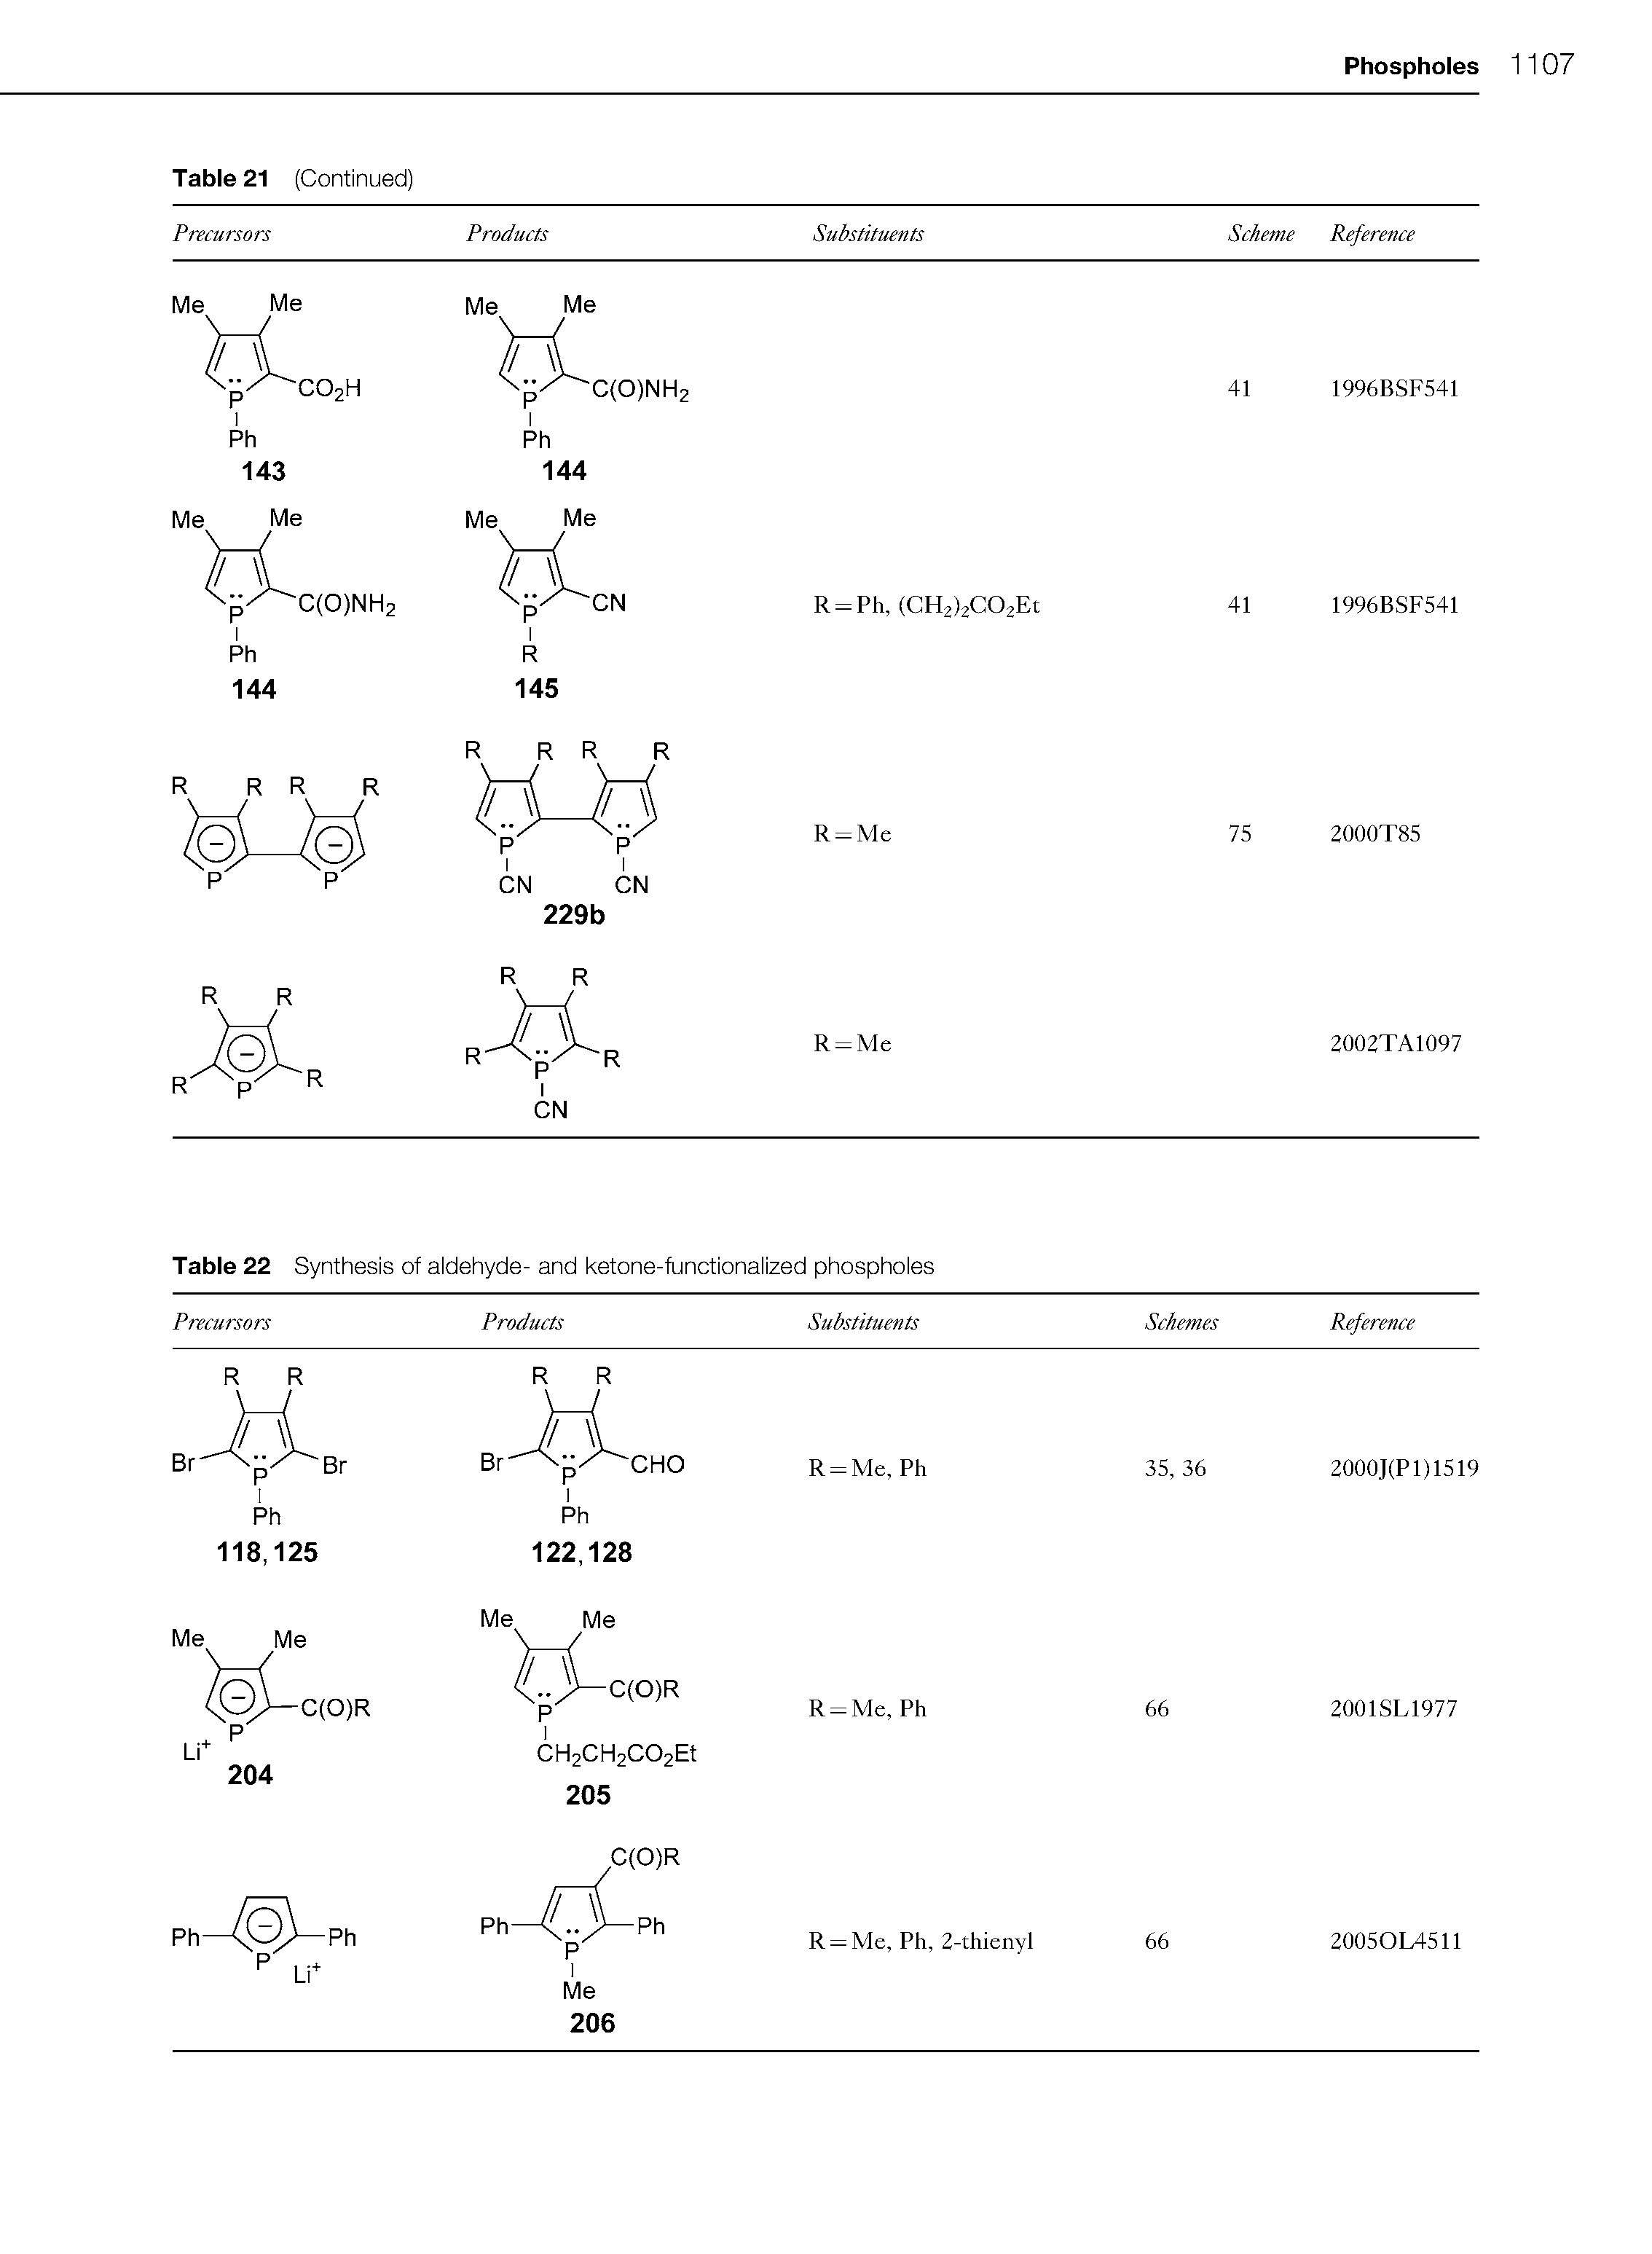 Table 22 Synthesis of aldehyde- and ketone-functionalized phospholes...